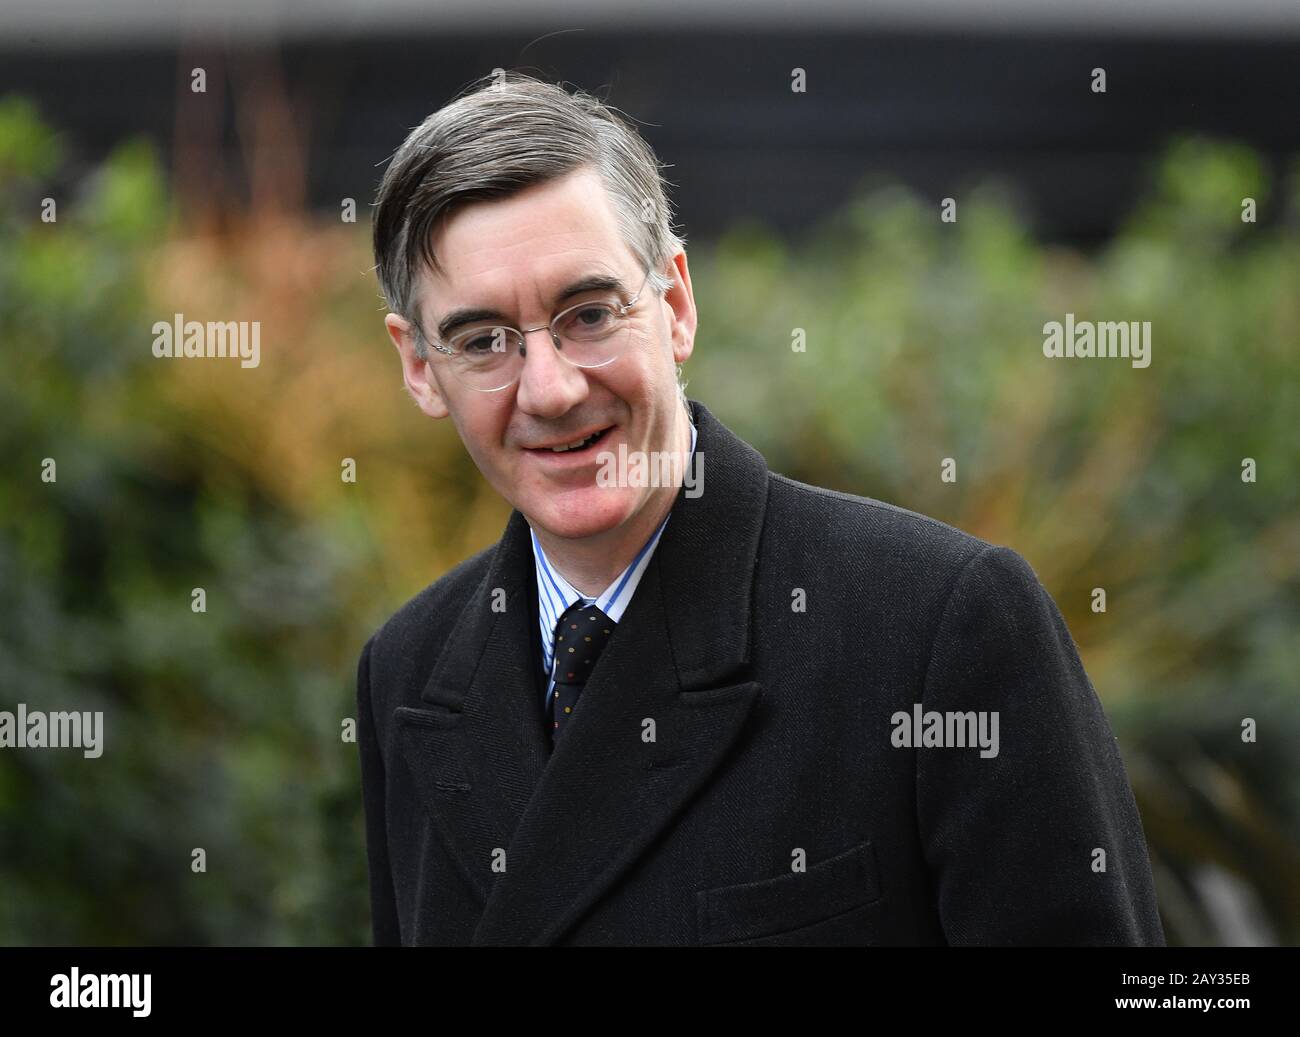 Downing Street, London, UK. 14th February 2020. Jacob Rees-Mogg MP, Leader of the Commons in Downing Street for weekly cabinet meeting. Credit: Malcolm Park/Alamy Live News. Stock Photo